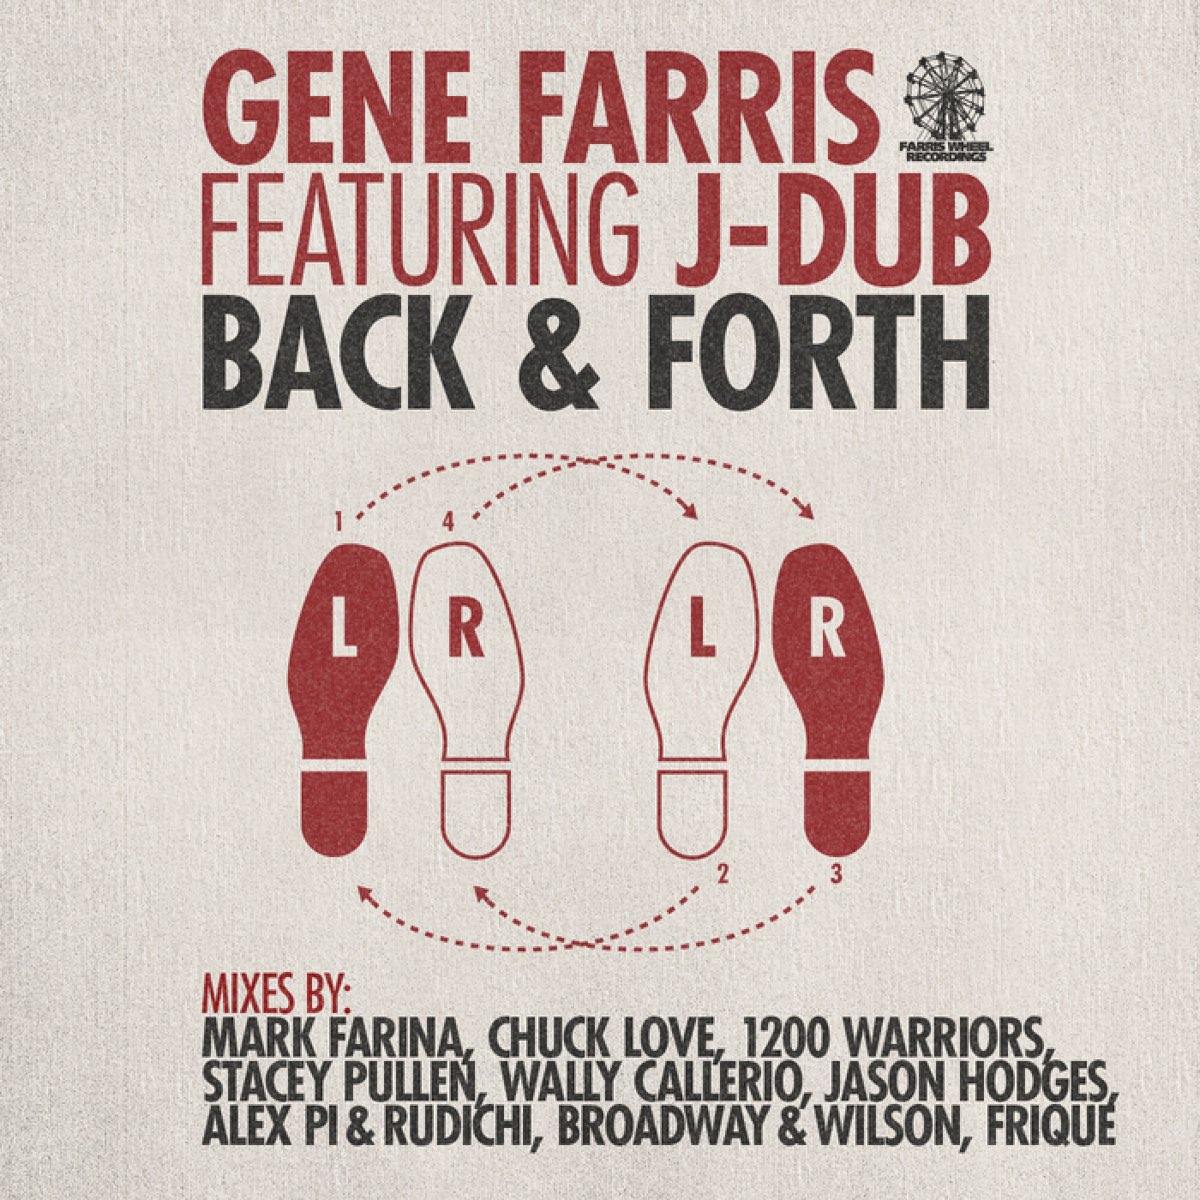 Back and forth. Forth back back forth. Gene Farris. Обои Twins Edge back and forth. Back feature